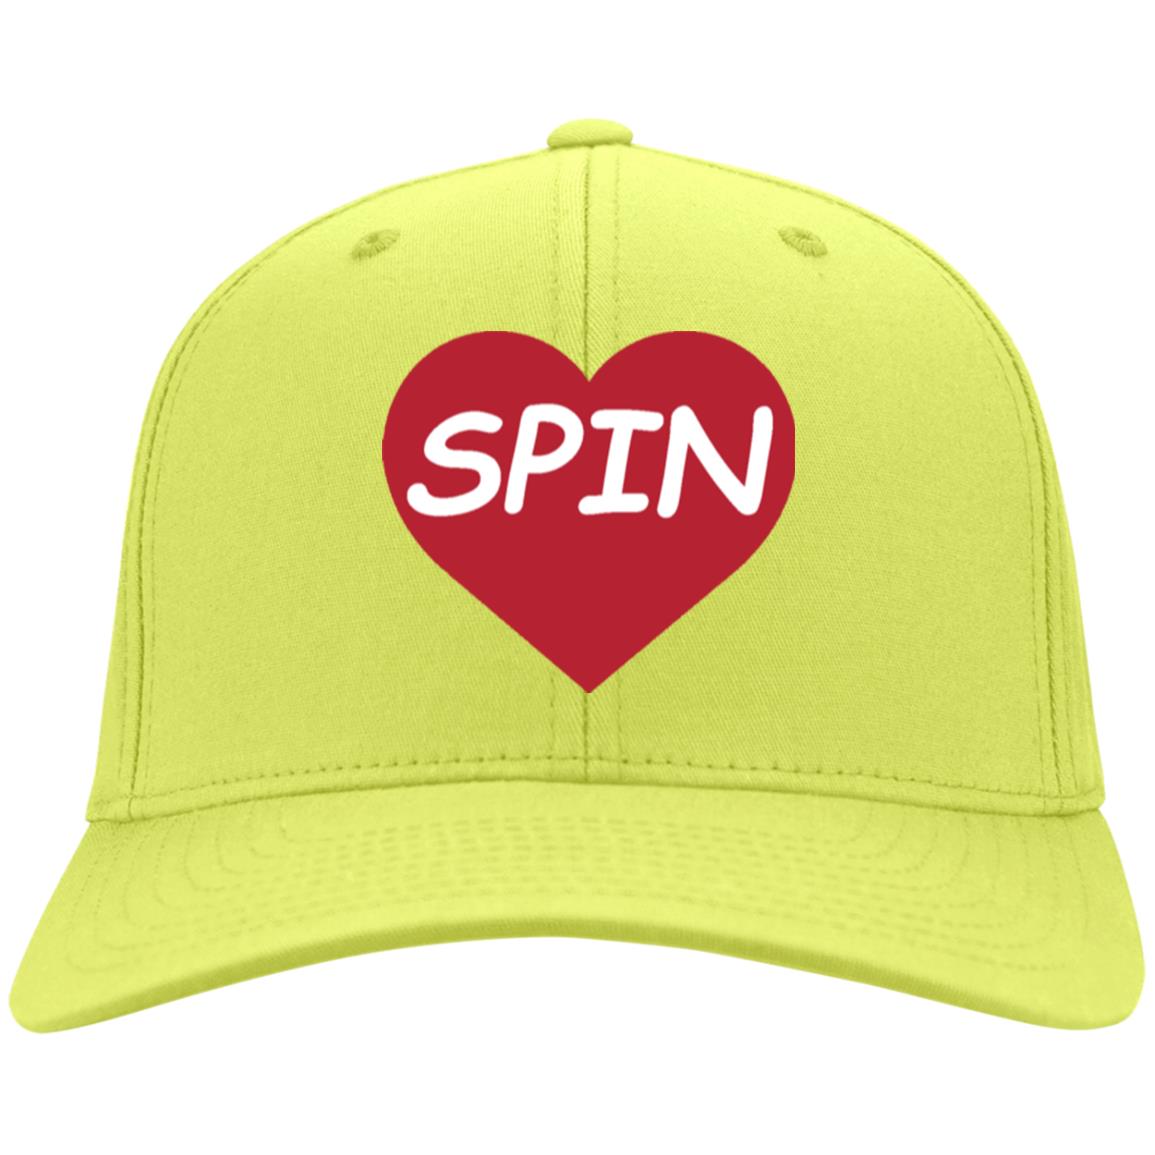 Spin Sport Hat